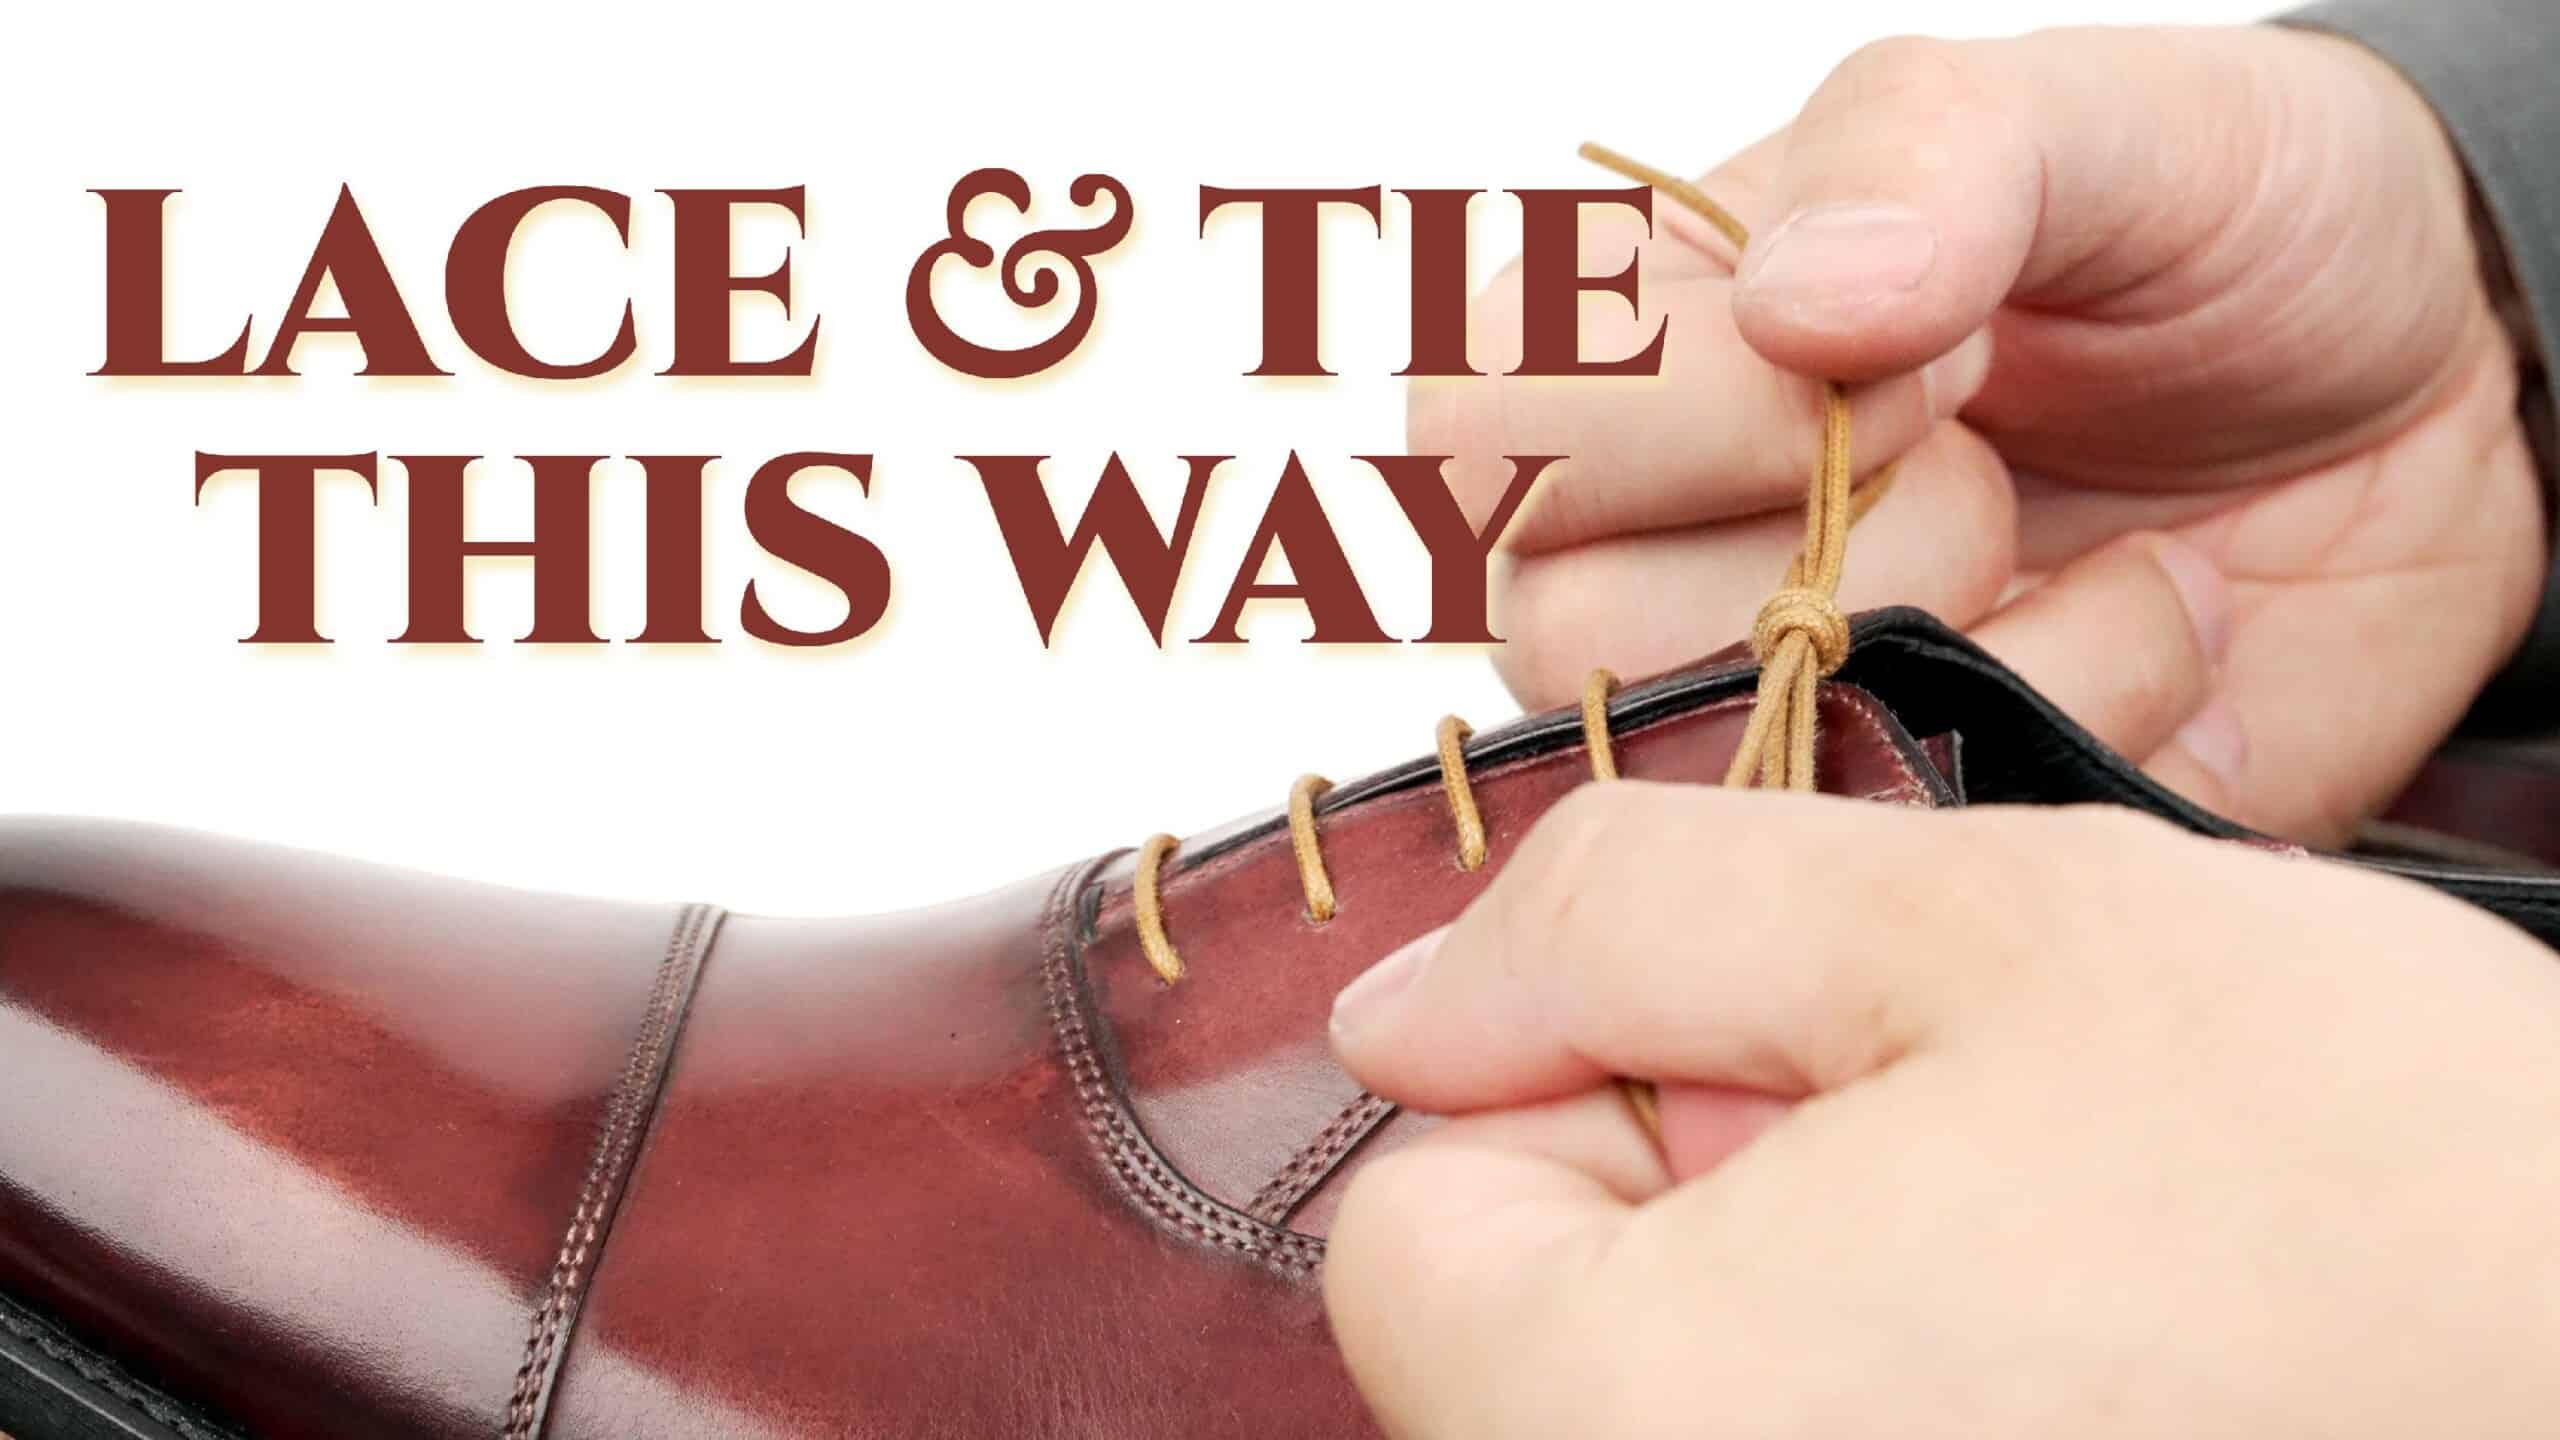 how to tie dress shoes